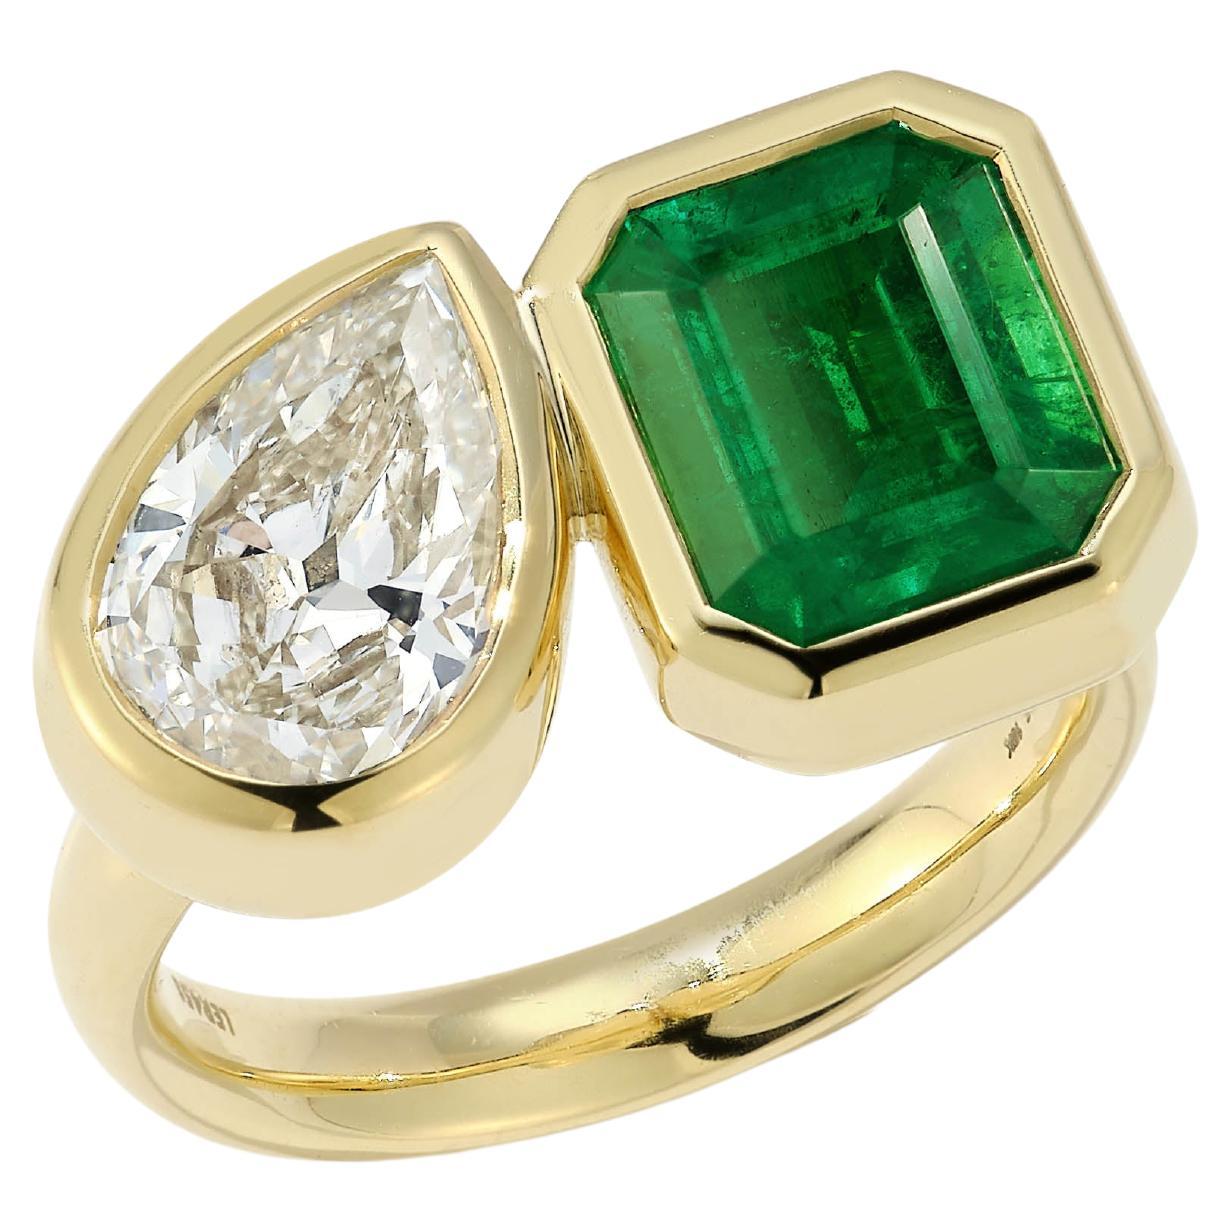 Our one-of-a-kind two stone ring is constructed in our rich 18K yellow gold and deep green colored Zambian emerald and Pear shaped diamond. It is an amazing and unique engagement ring or the perfect right hand ring for everyday.
At Jemma Wynne, we